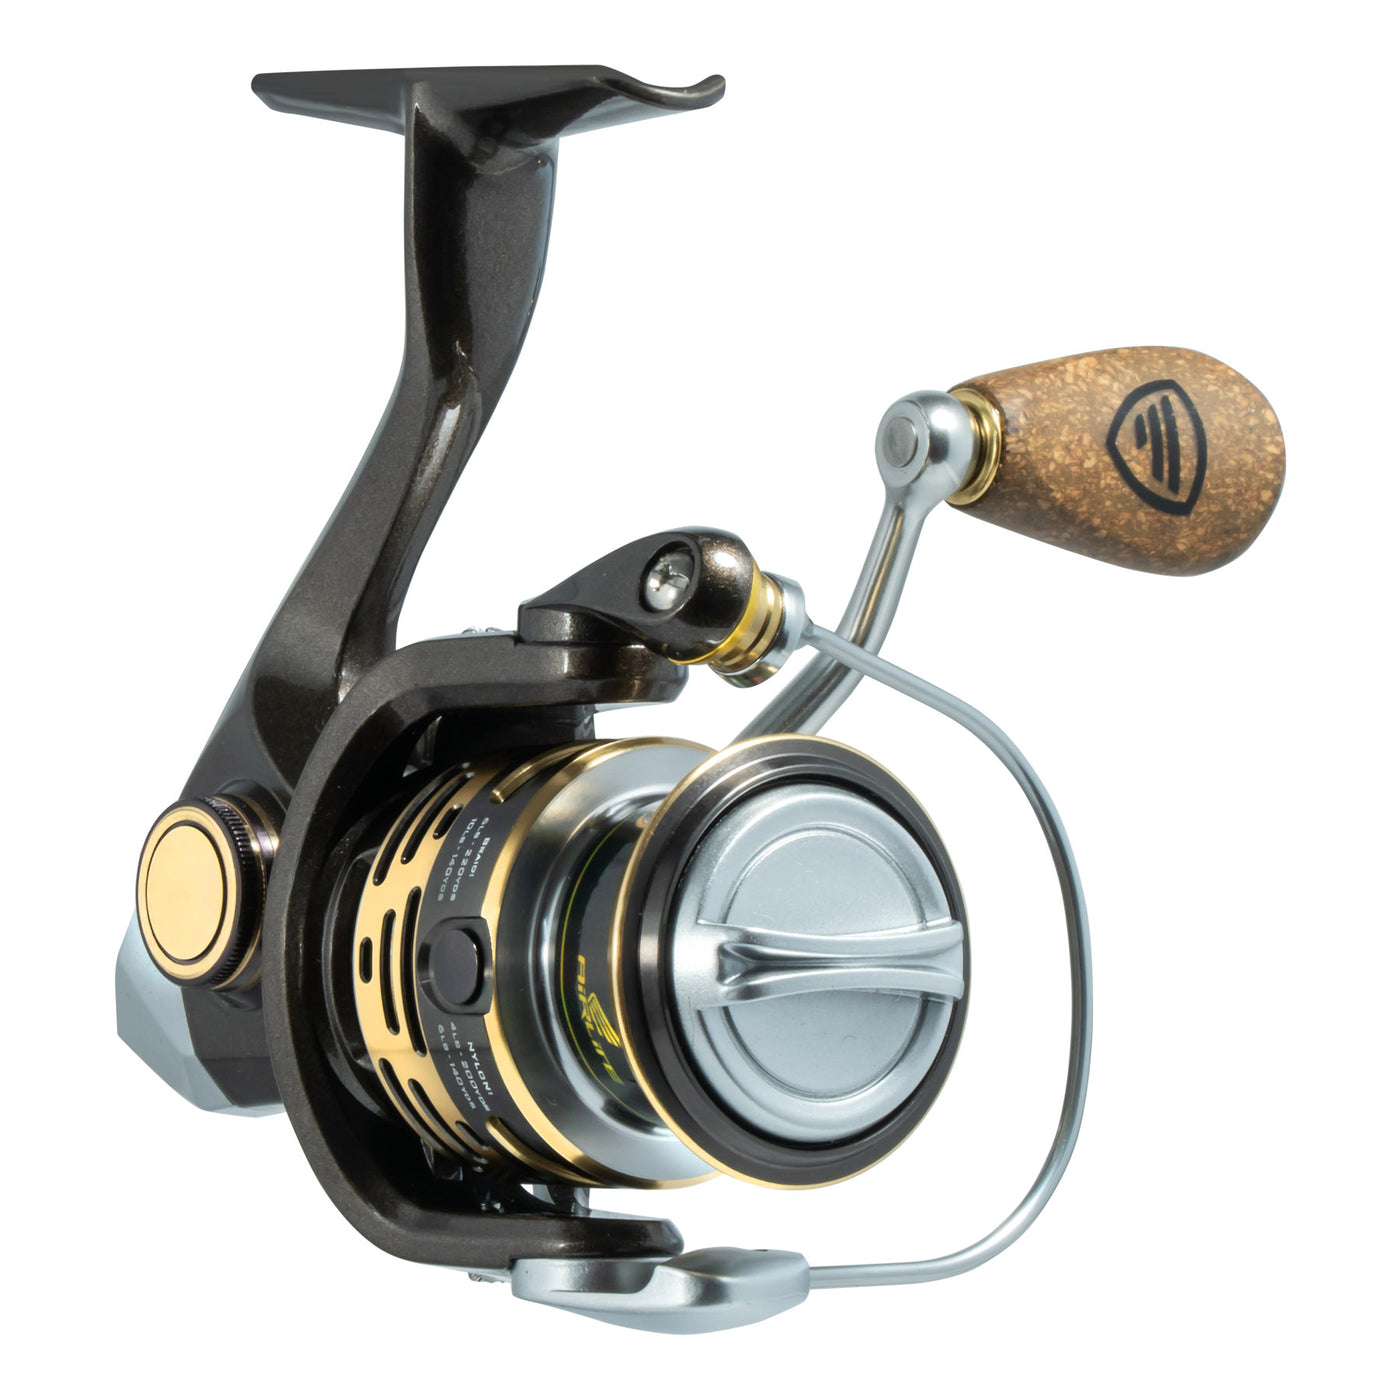 Yampa River Spinning Reel